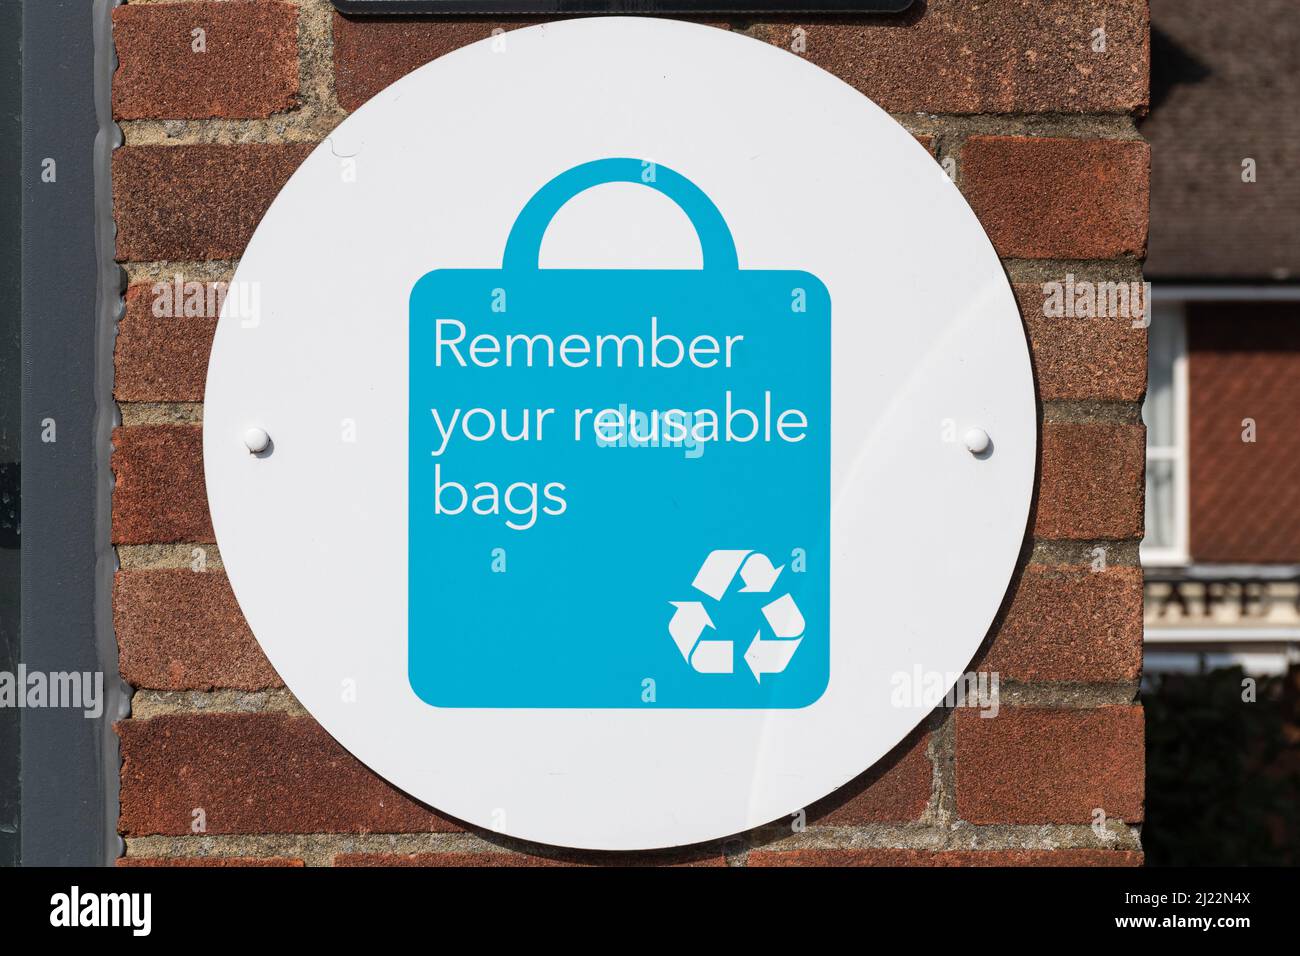 Remember your reusable bags sign outside a supermarket shop, UK, with recycling symbol Stock Photo